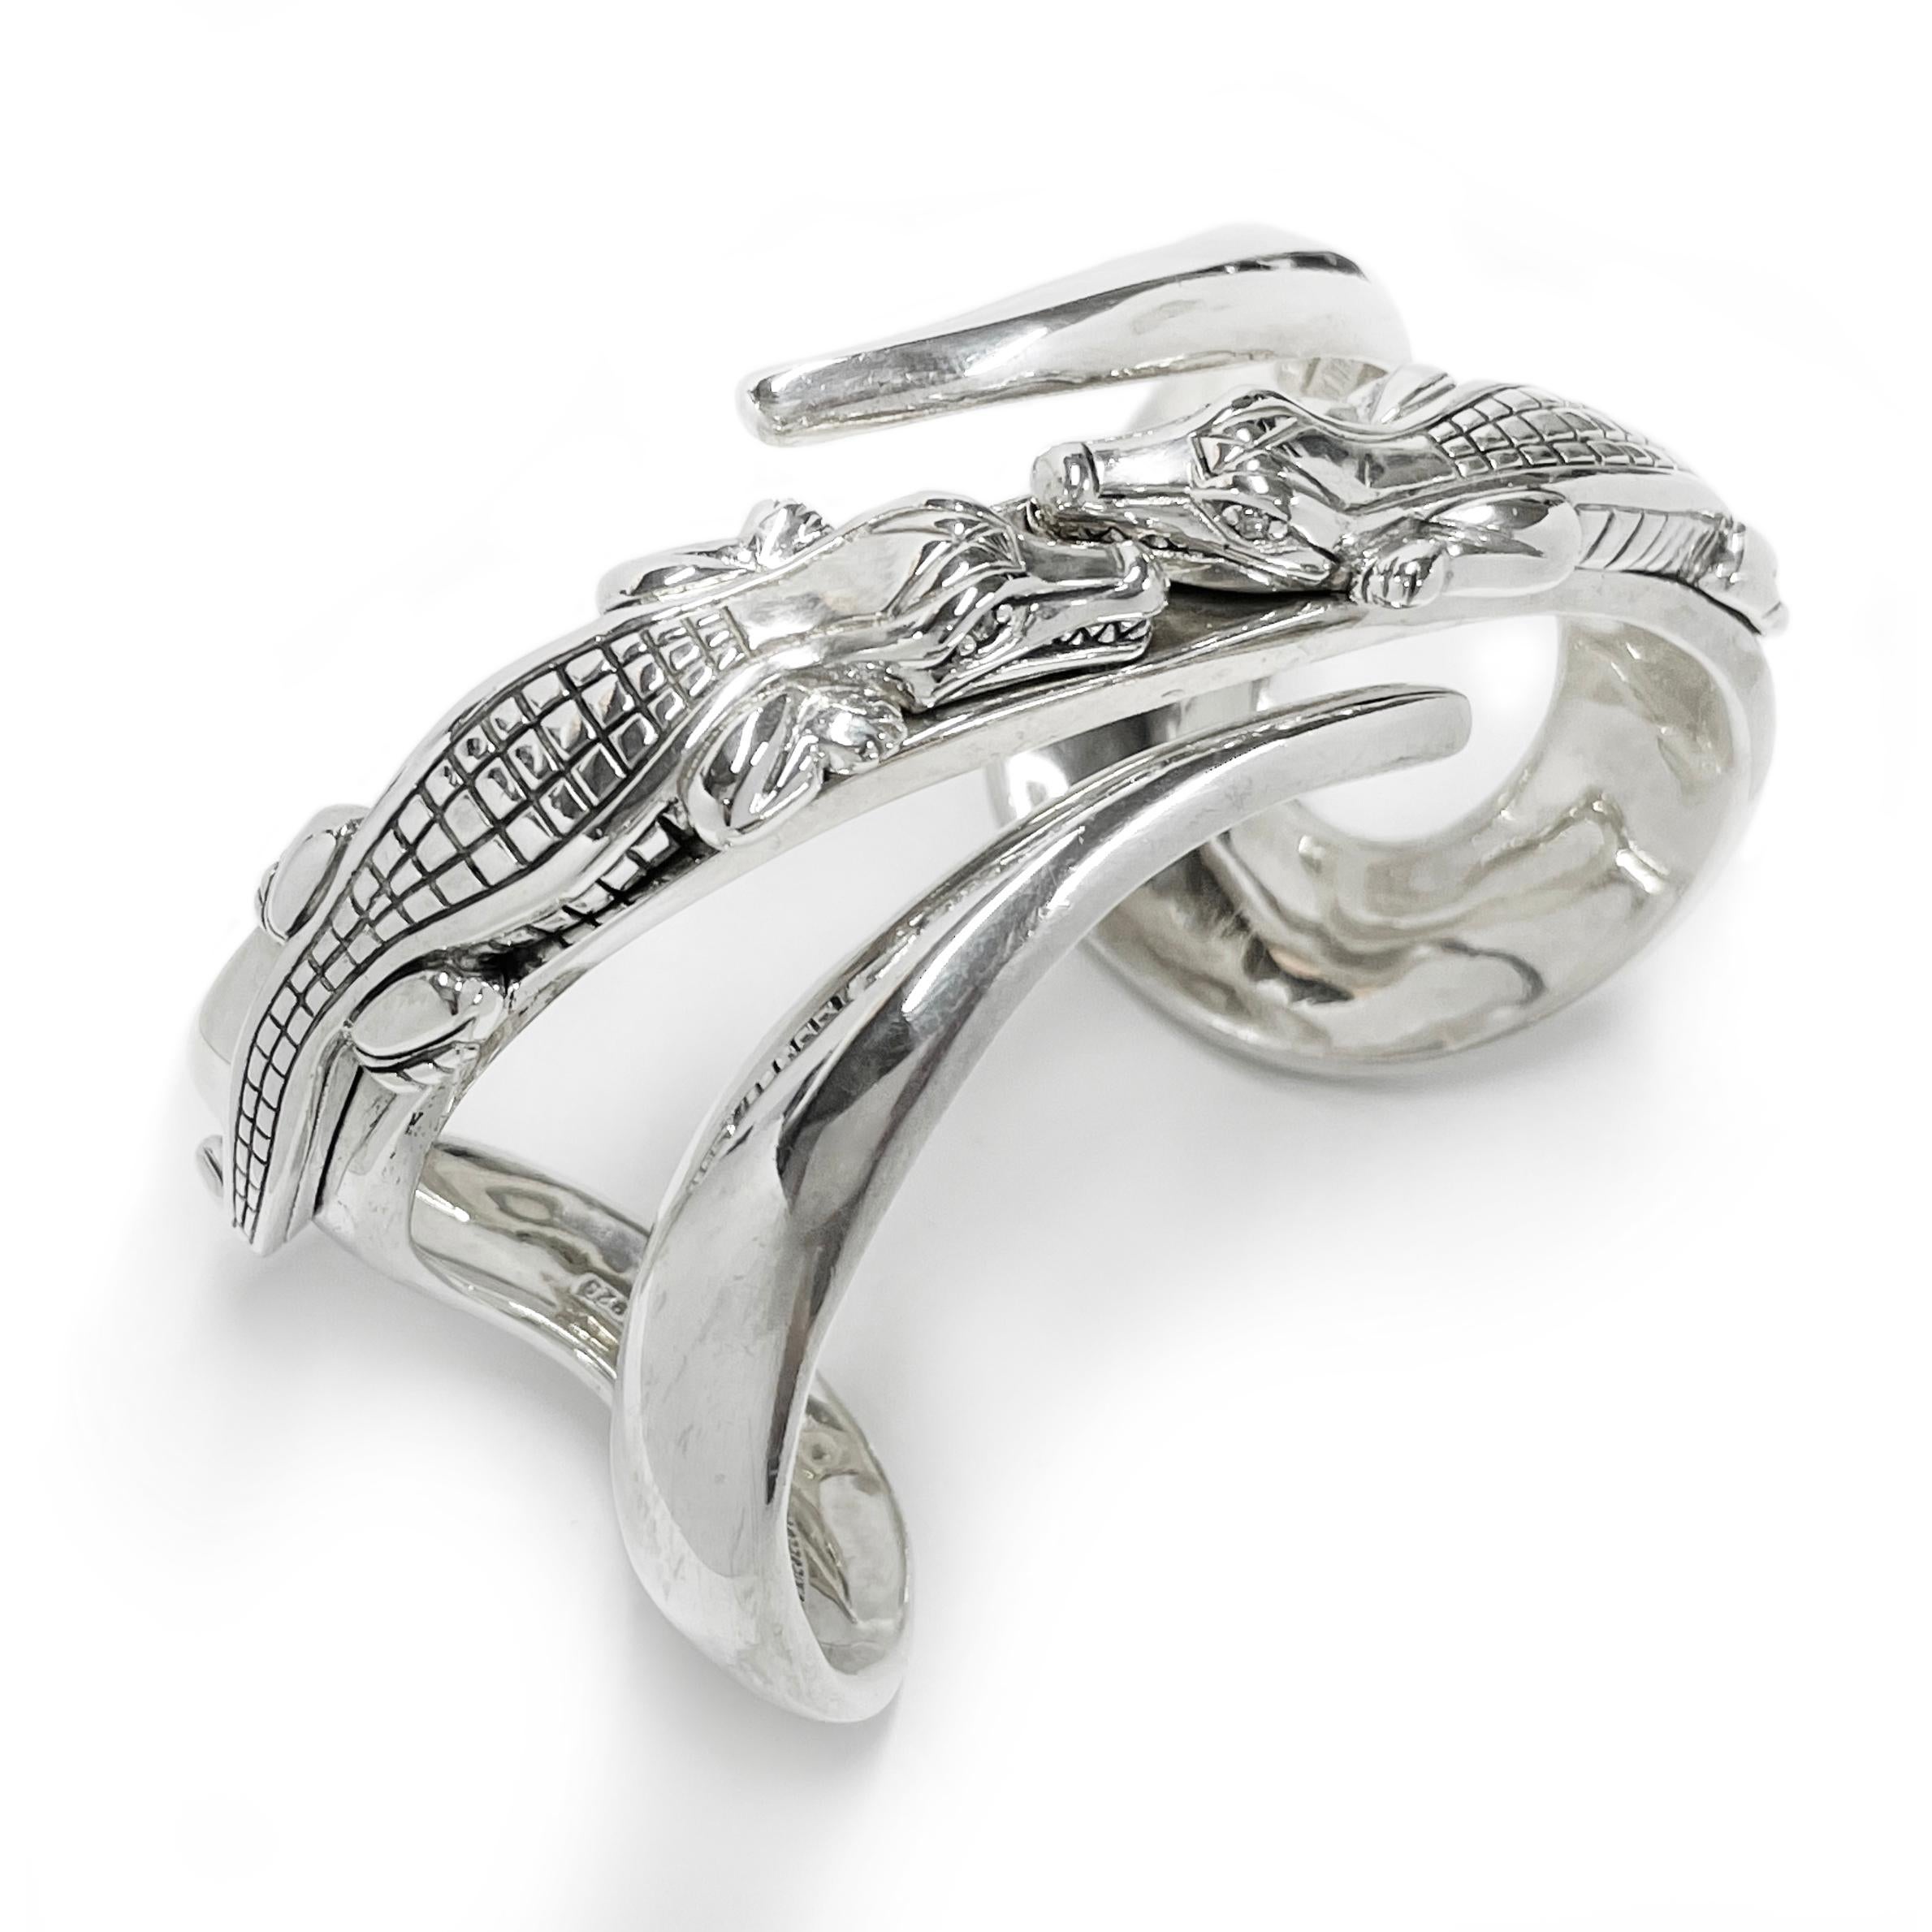 B. Kieselstein Cord Silver Alligator Diamond Cuff. This statement cuff features two facing alligators on the top of the cuff and curved tail-like swooshes. Four 1.8mm round diamonds are set in the eyes of the alligators for an added accent. The